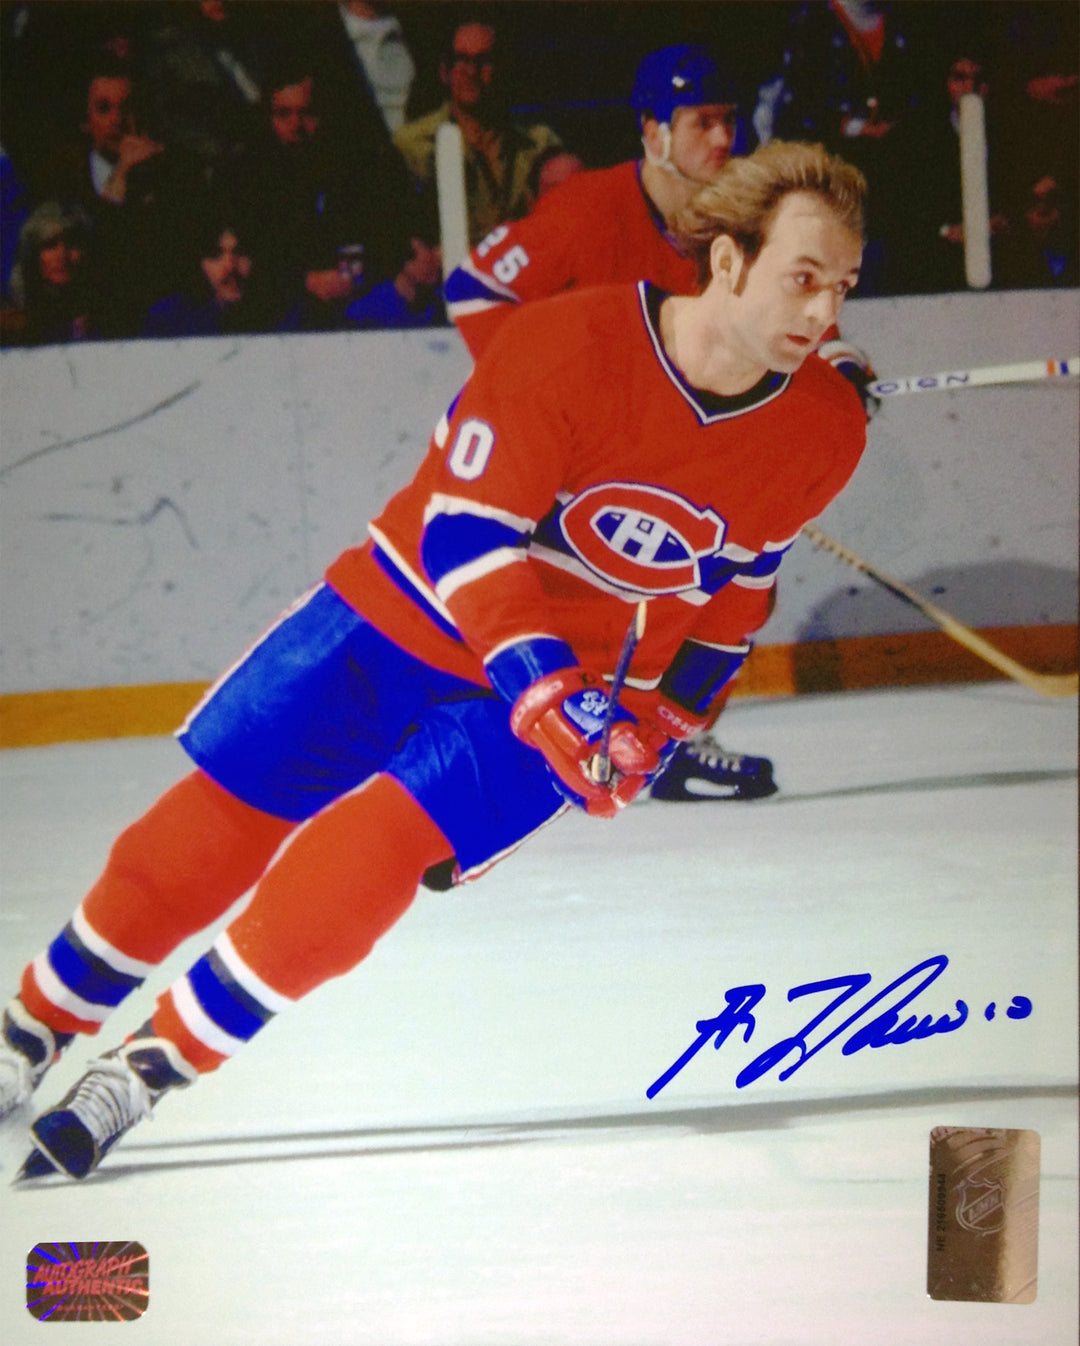 Guy Lafleur Signed 8X10 Photograph (Red) Montreal Canadiens, Montreal Canadiens, NHL, Hockey, Autographed, Signed, AAHPH30284